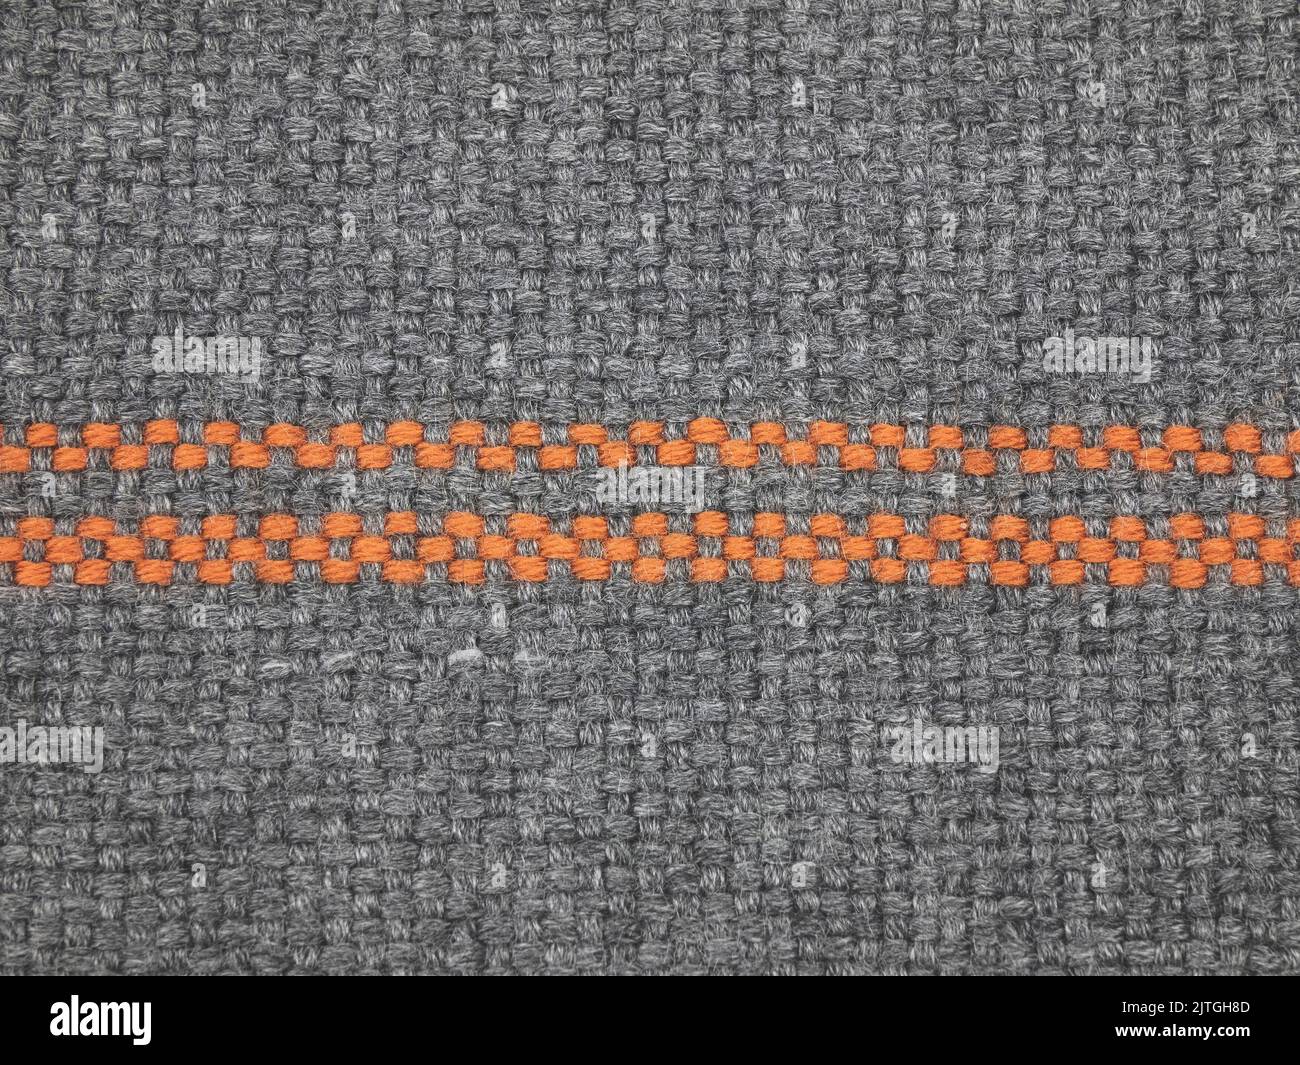 Texture of knitted fabric. Pattern of interwoven threads. Gray and orange textile material, close up Stock Photo